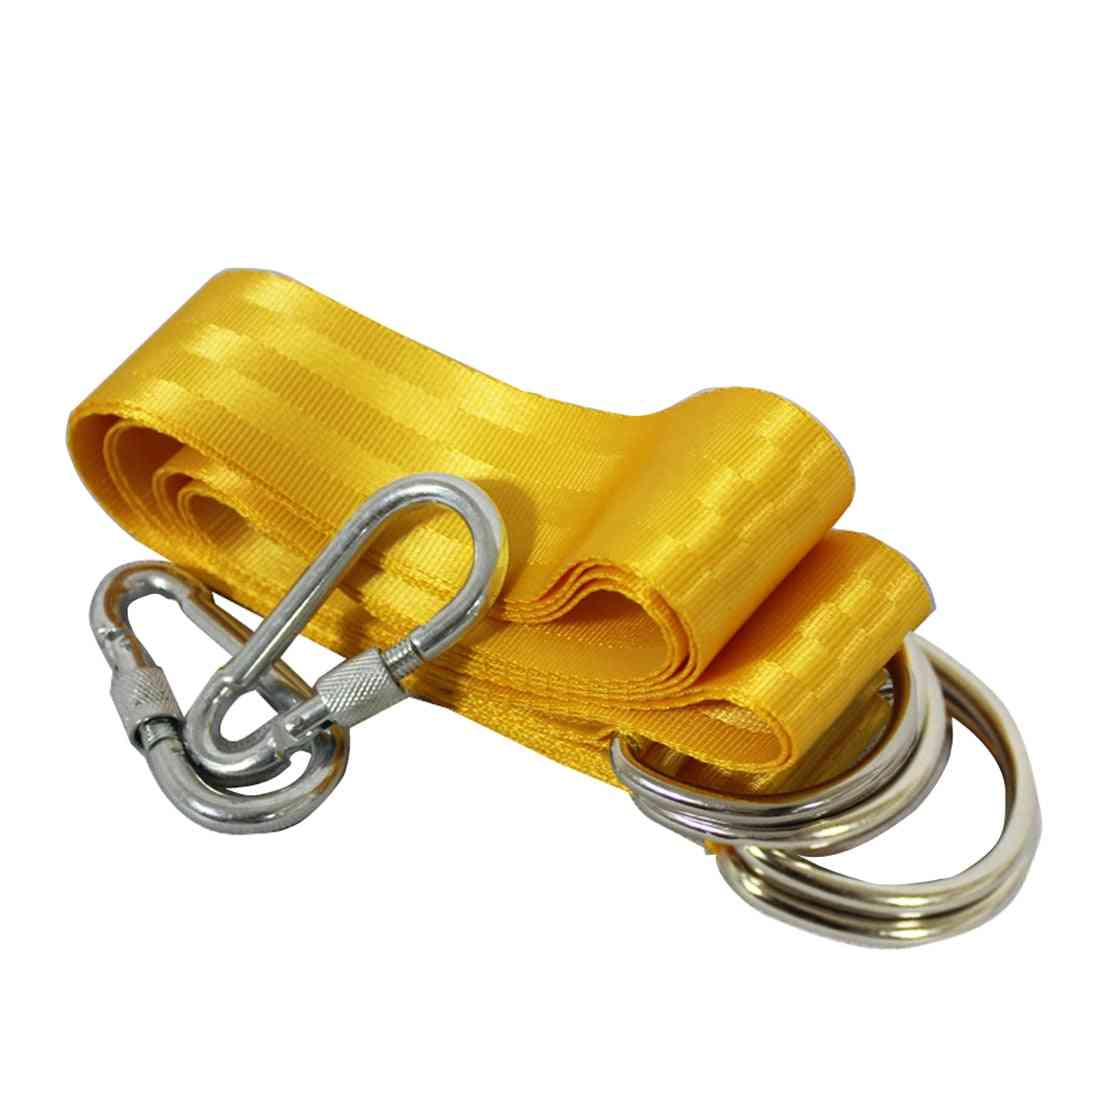 Outdoor Swing - X Rope Lock Tie Strength Polyester Webbing Straps Safe